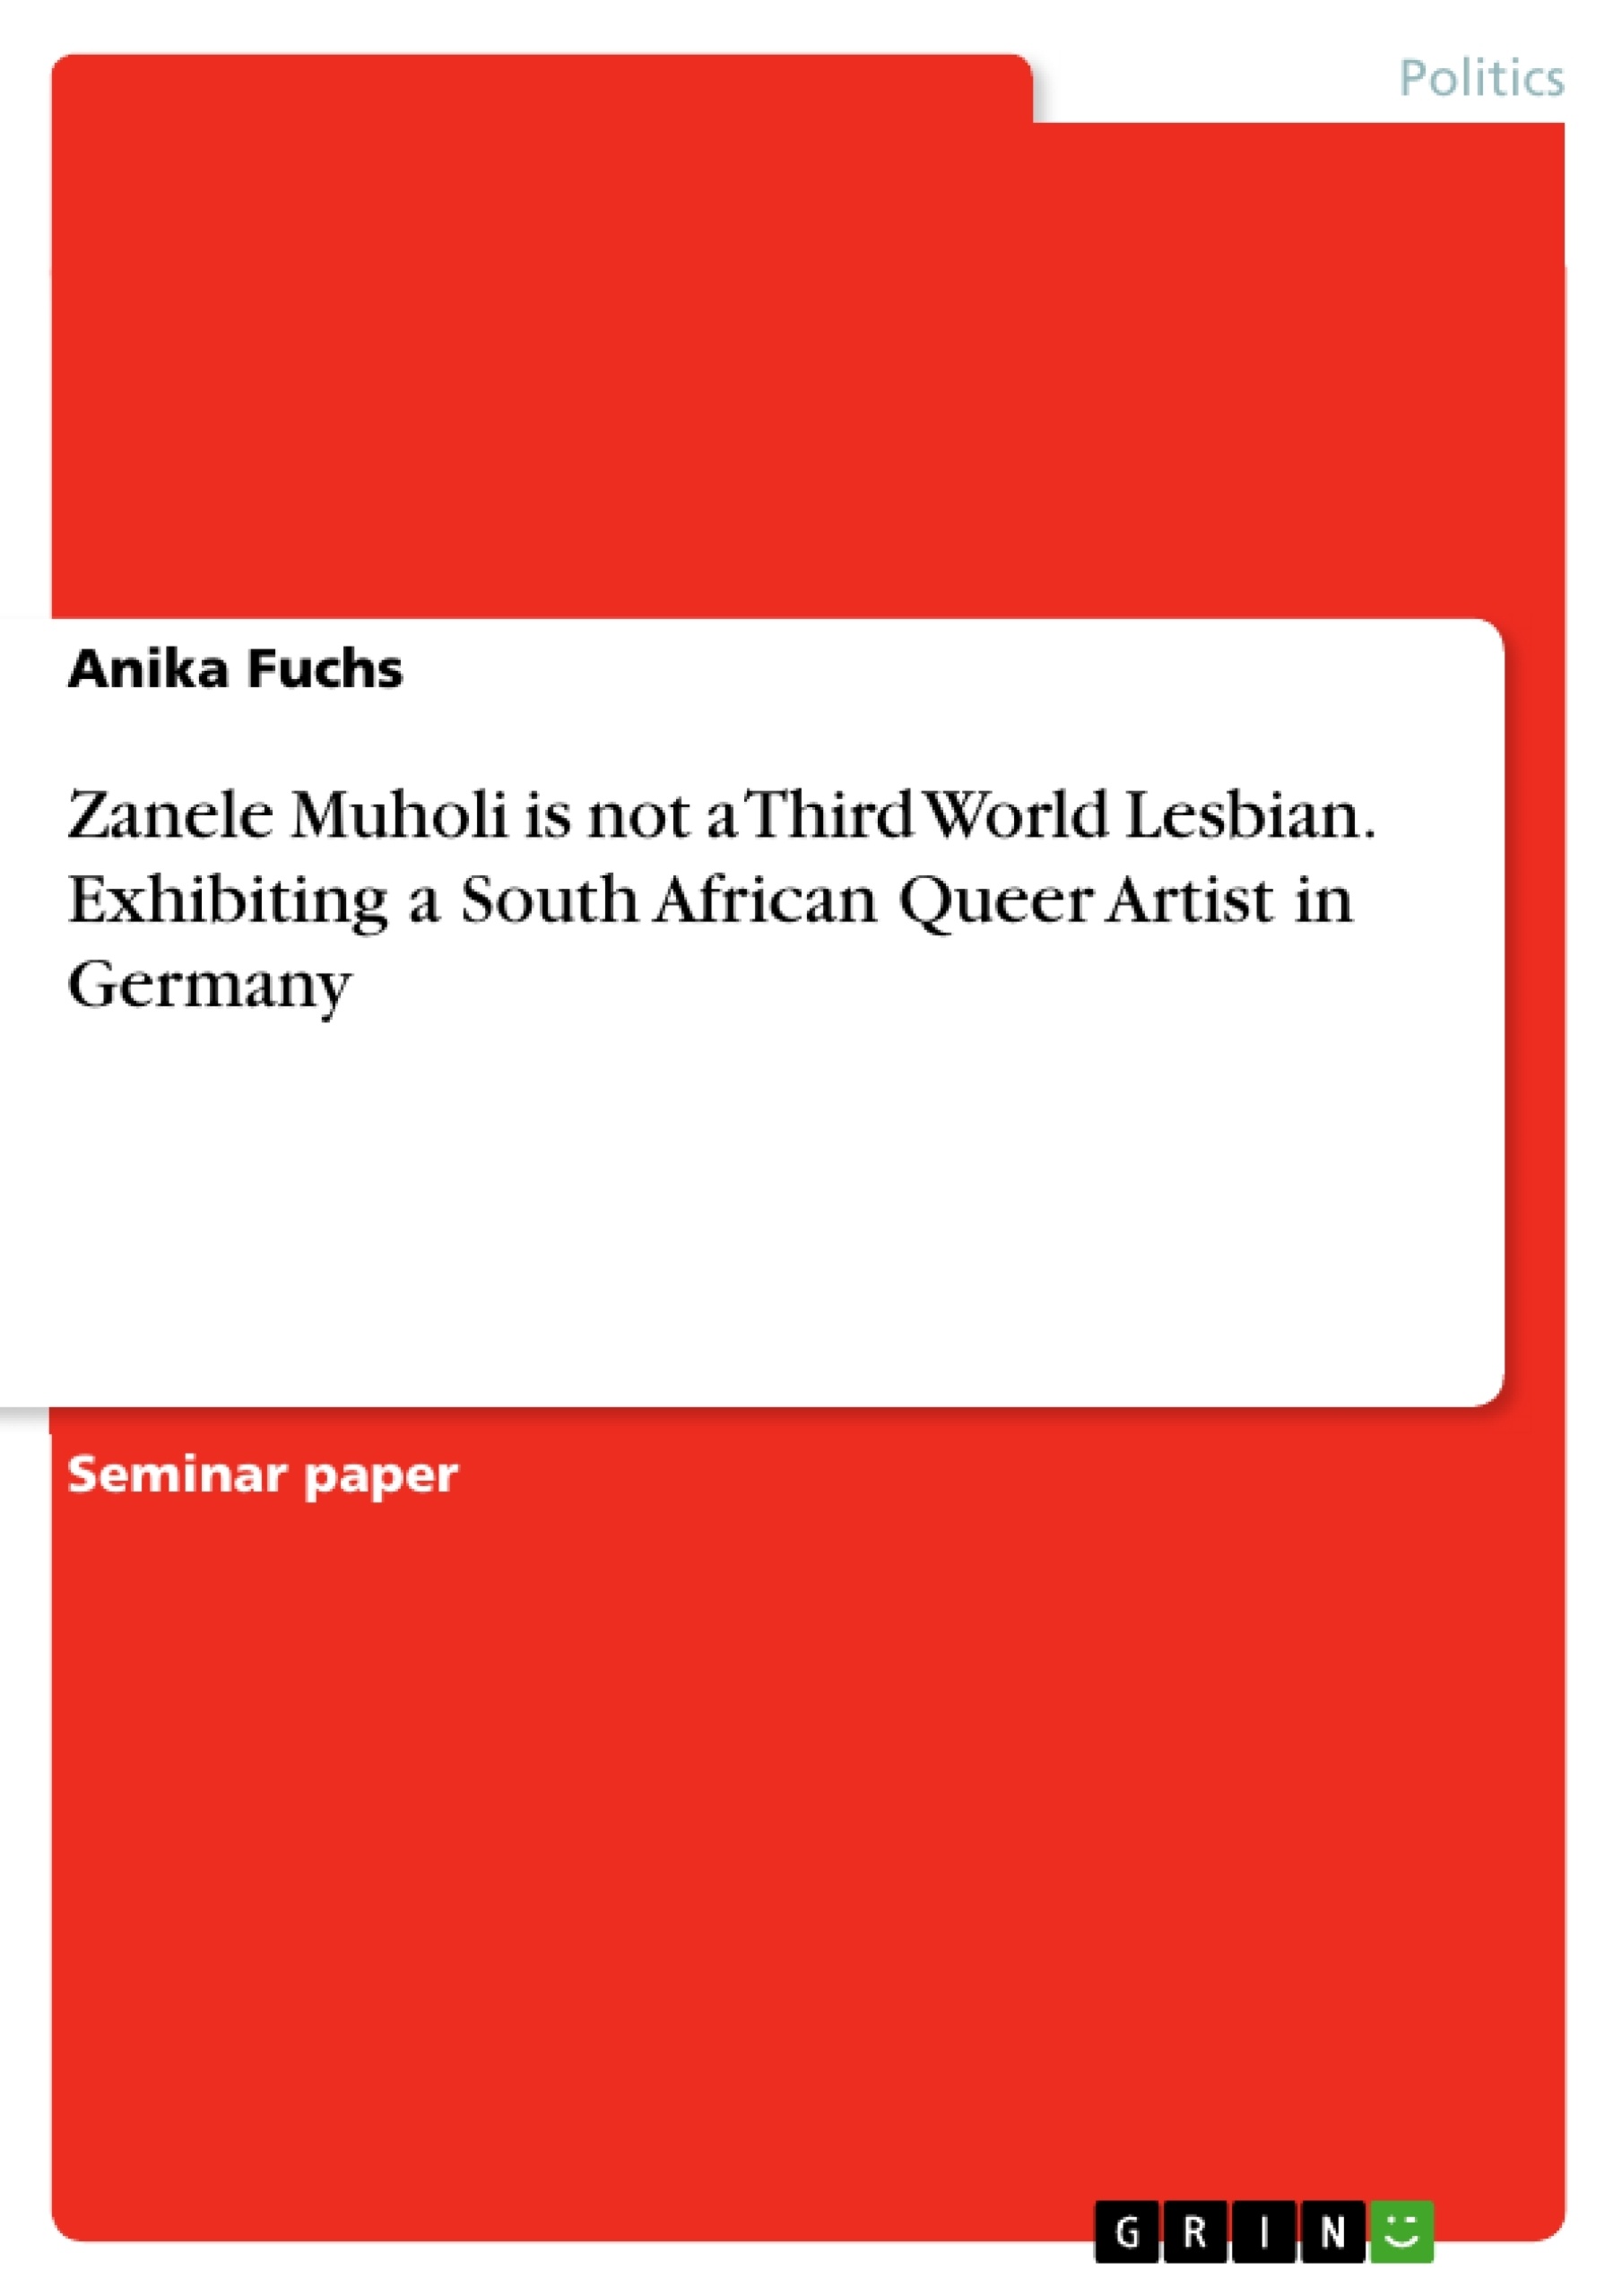 Titre: Zanele Muholi is not a Third World Lesbian. Exhibiting a South African Queer Artist in Germany